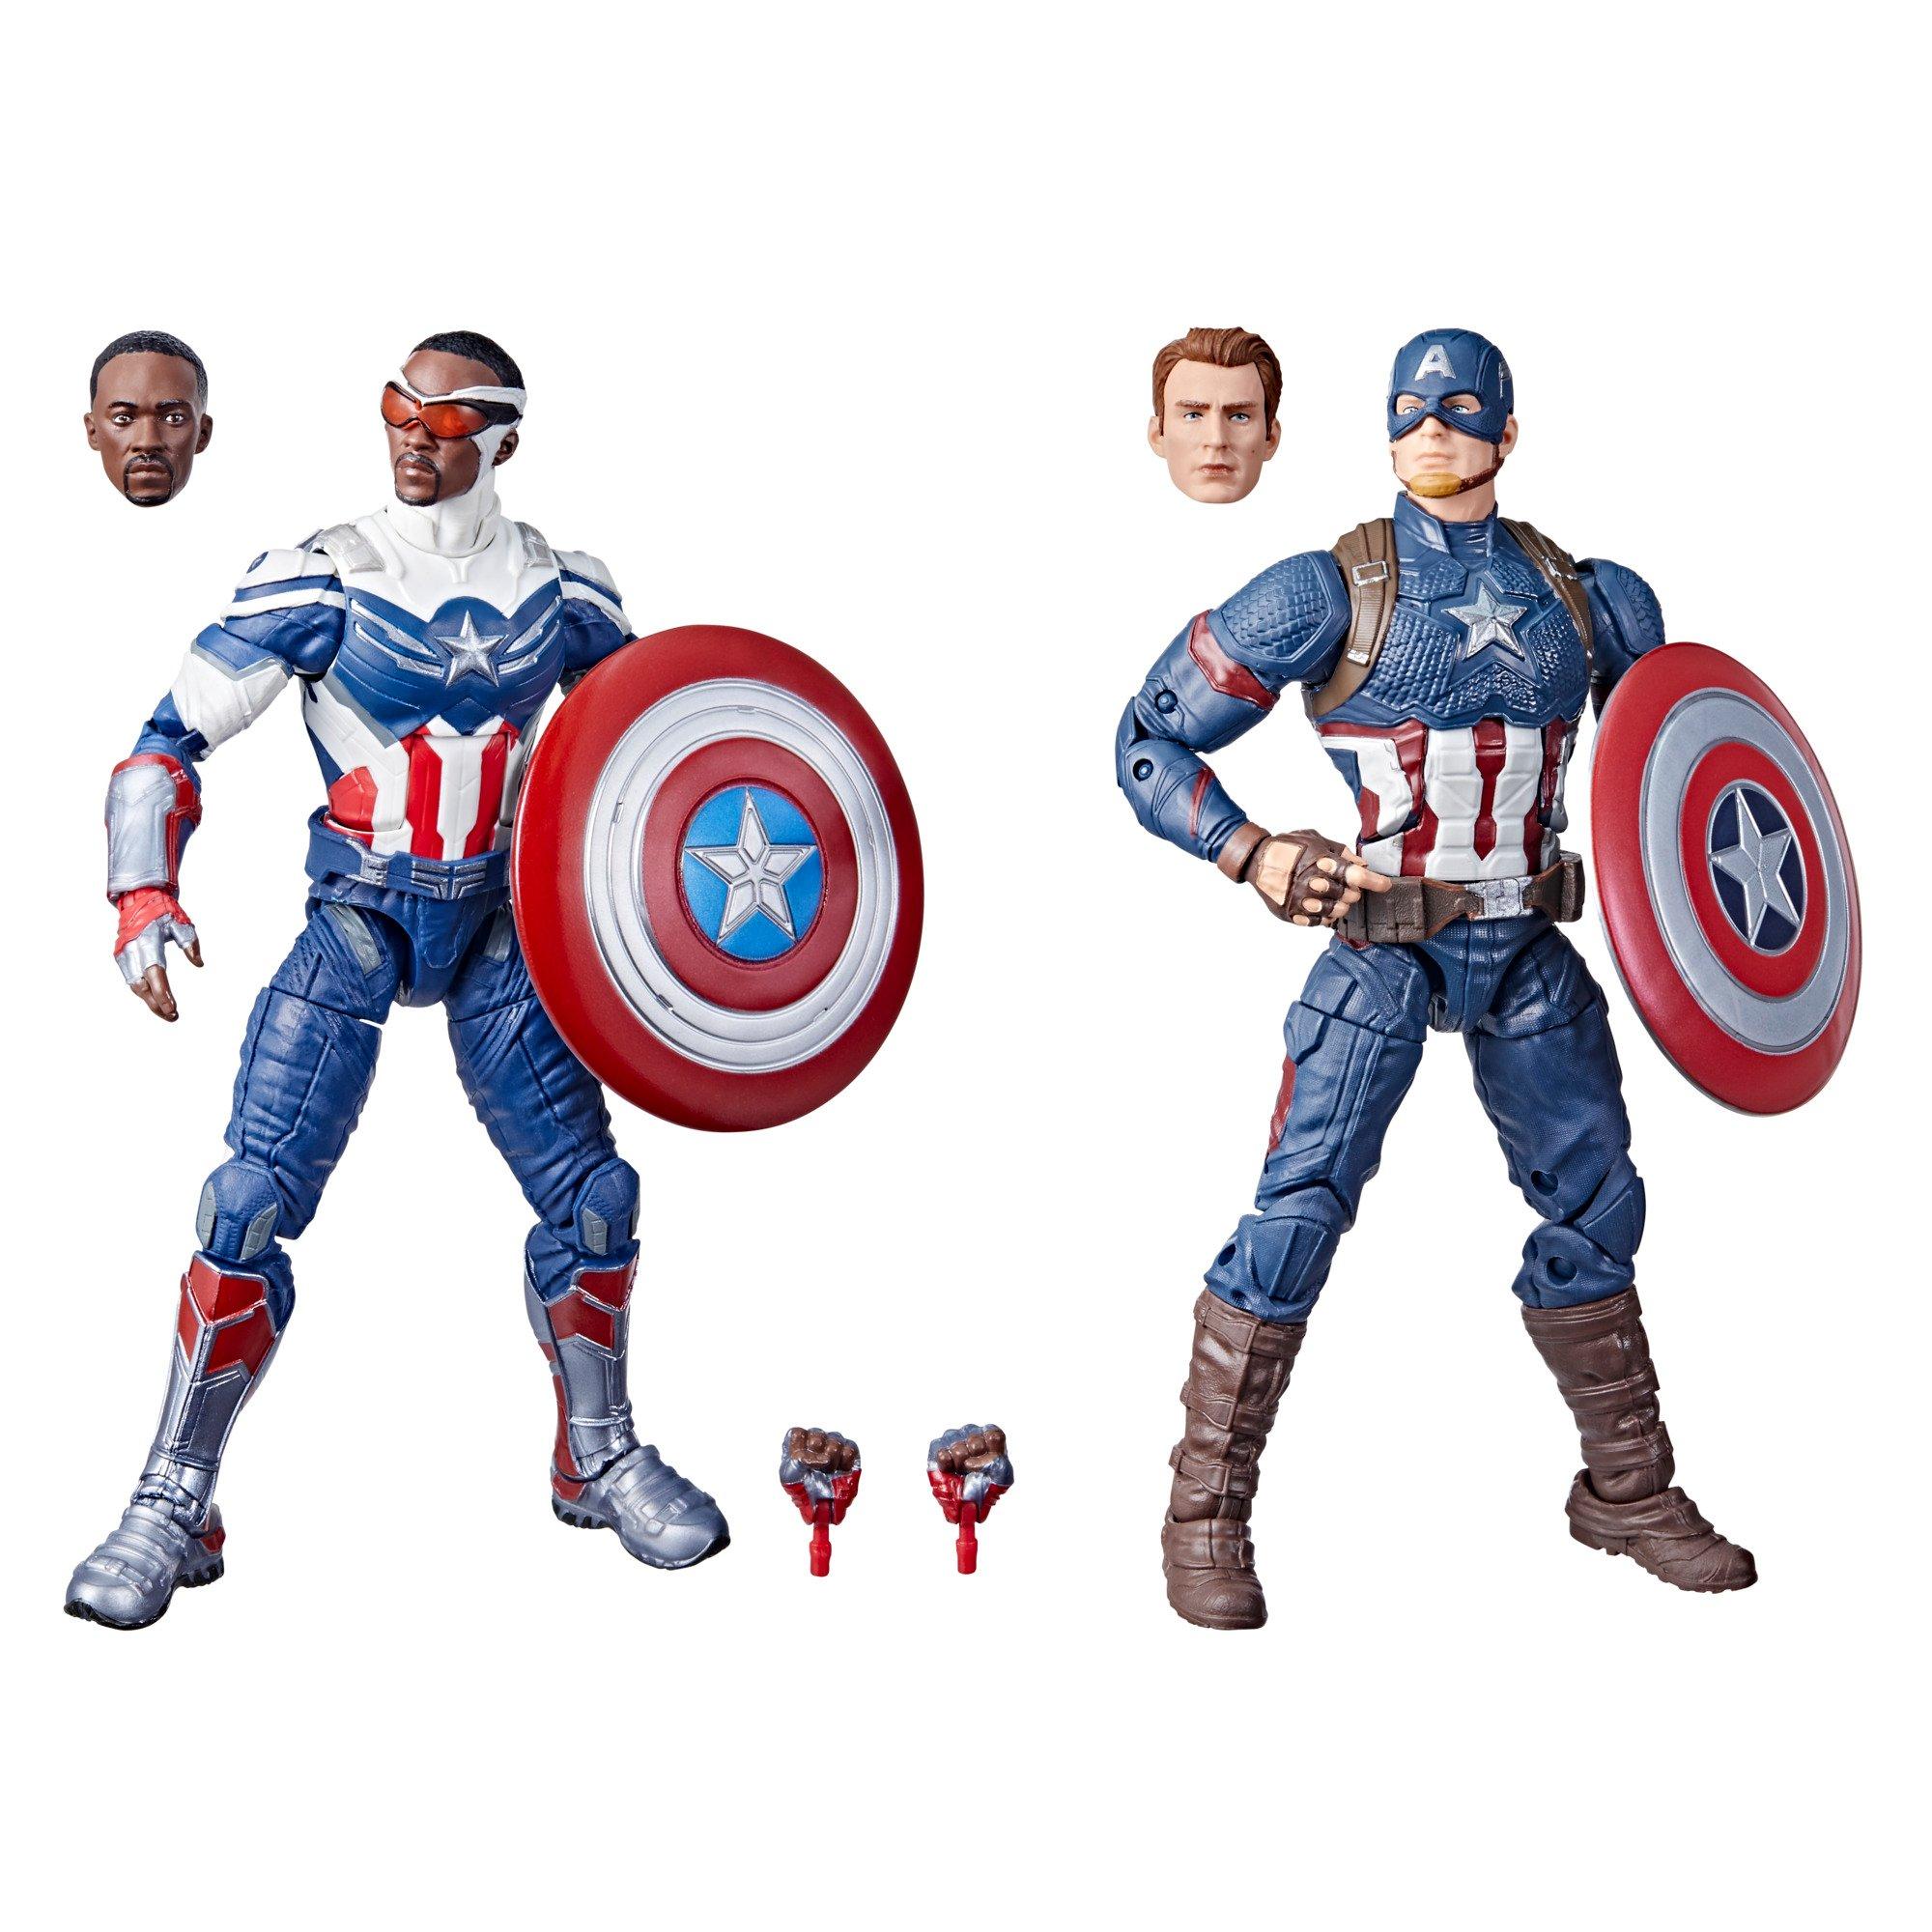 De ninguna manera circuito pantalla Hasbro Marvel Legends Series The Falcon and the Winter Soldier Sam Wilson  and Avengers: Endgame Steve Rogers 6-in Action Figure Set 2-Pack | GameStop